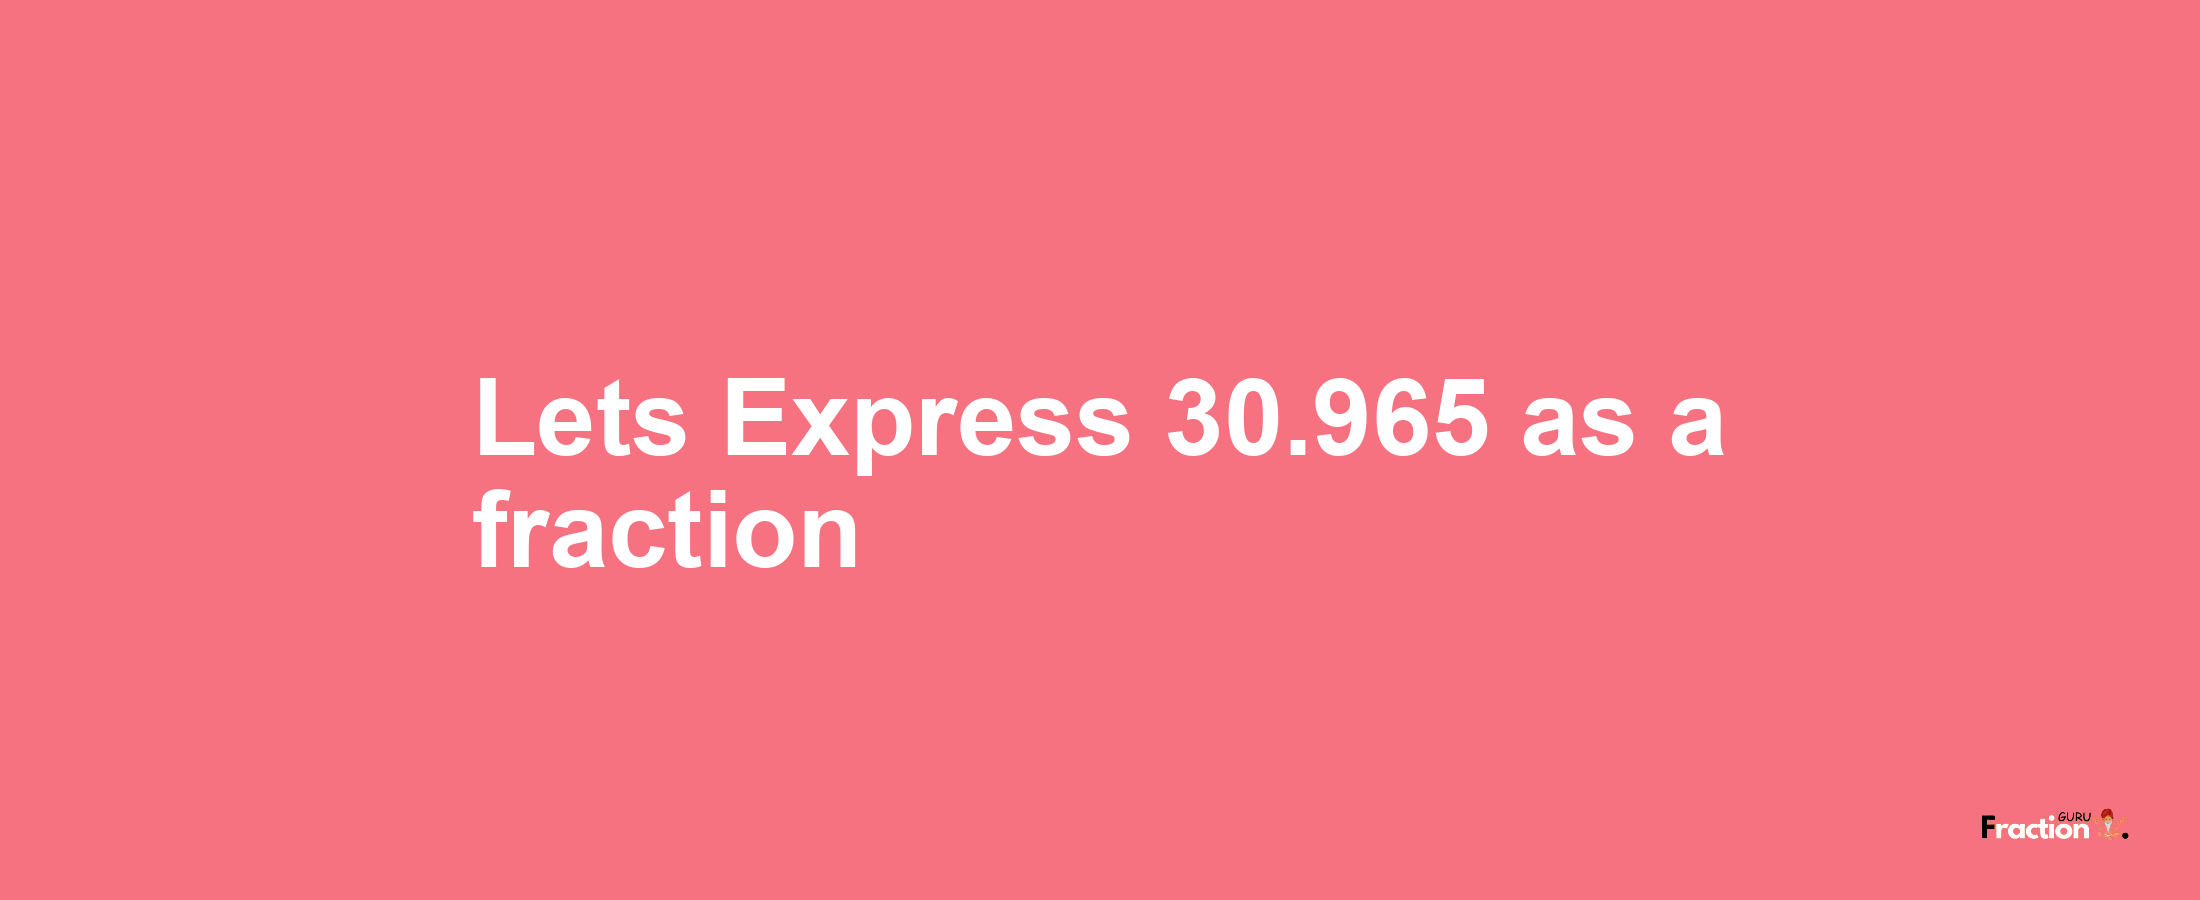 Lets Express 30.965 as afraction